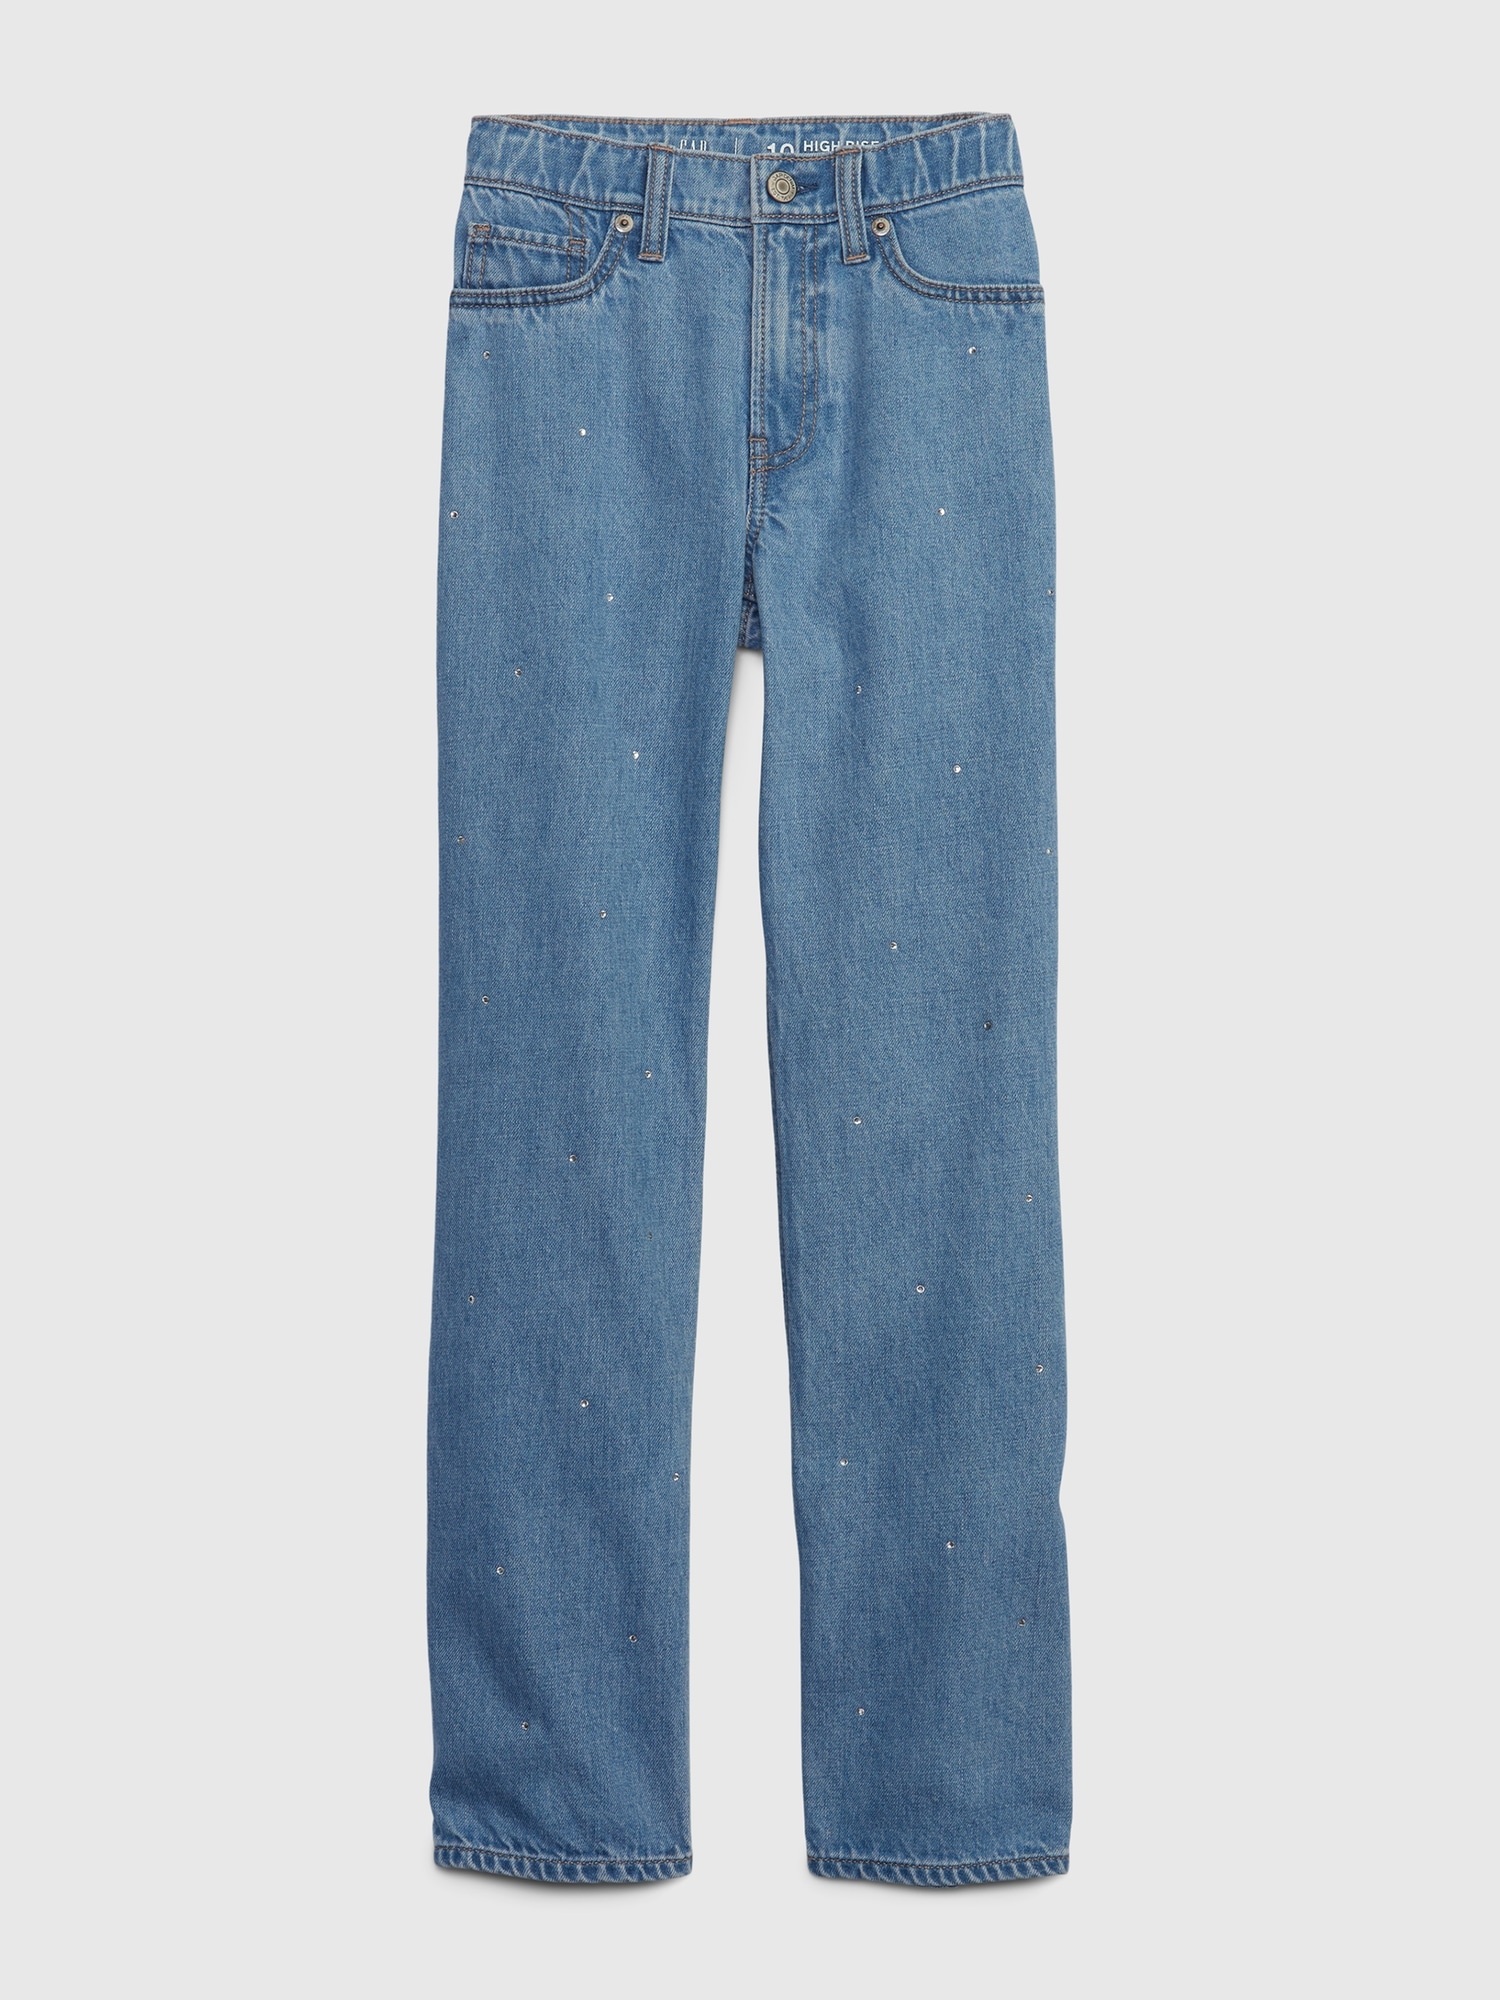 90s Straight Jeans with Washwell Gap